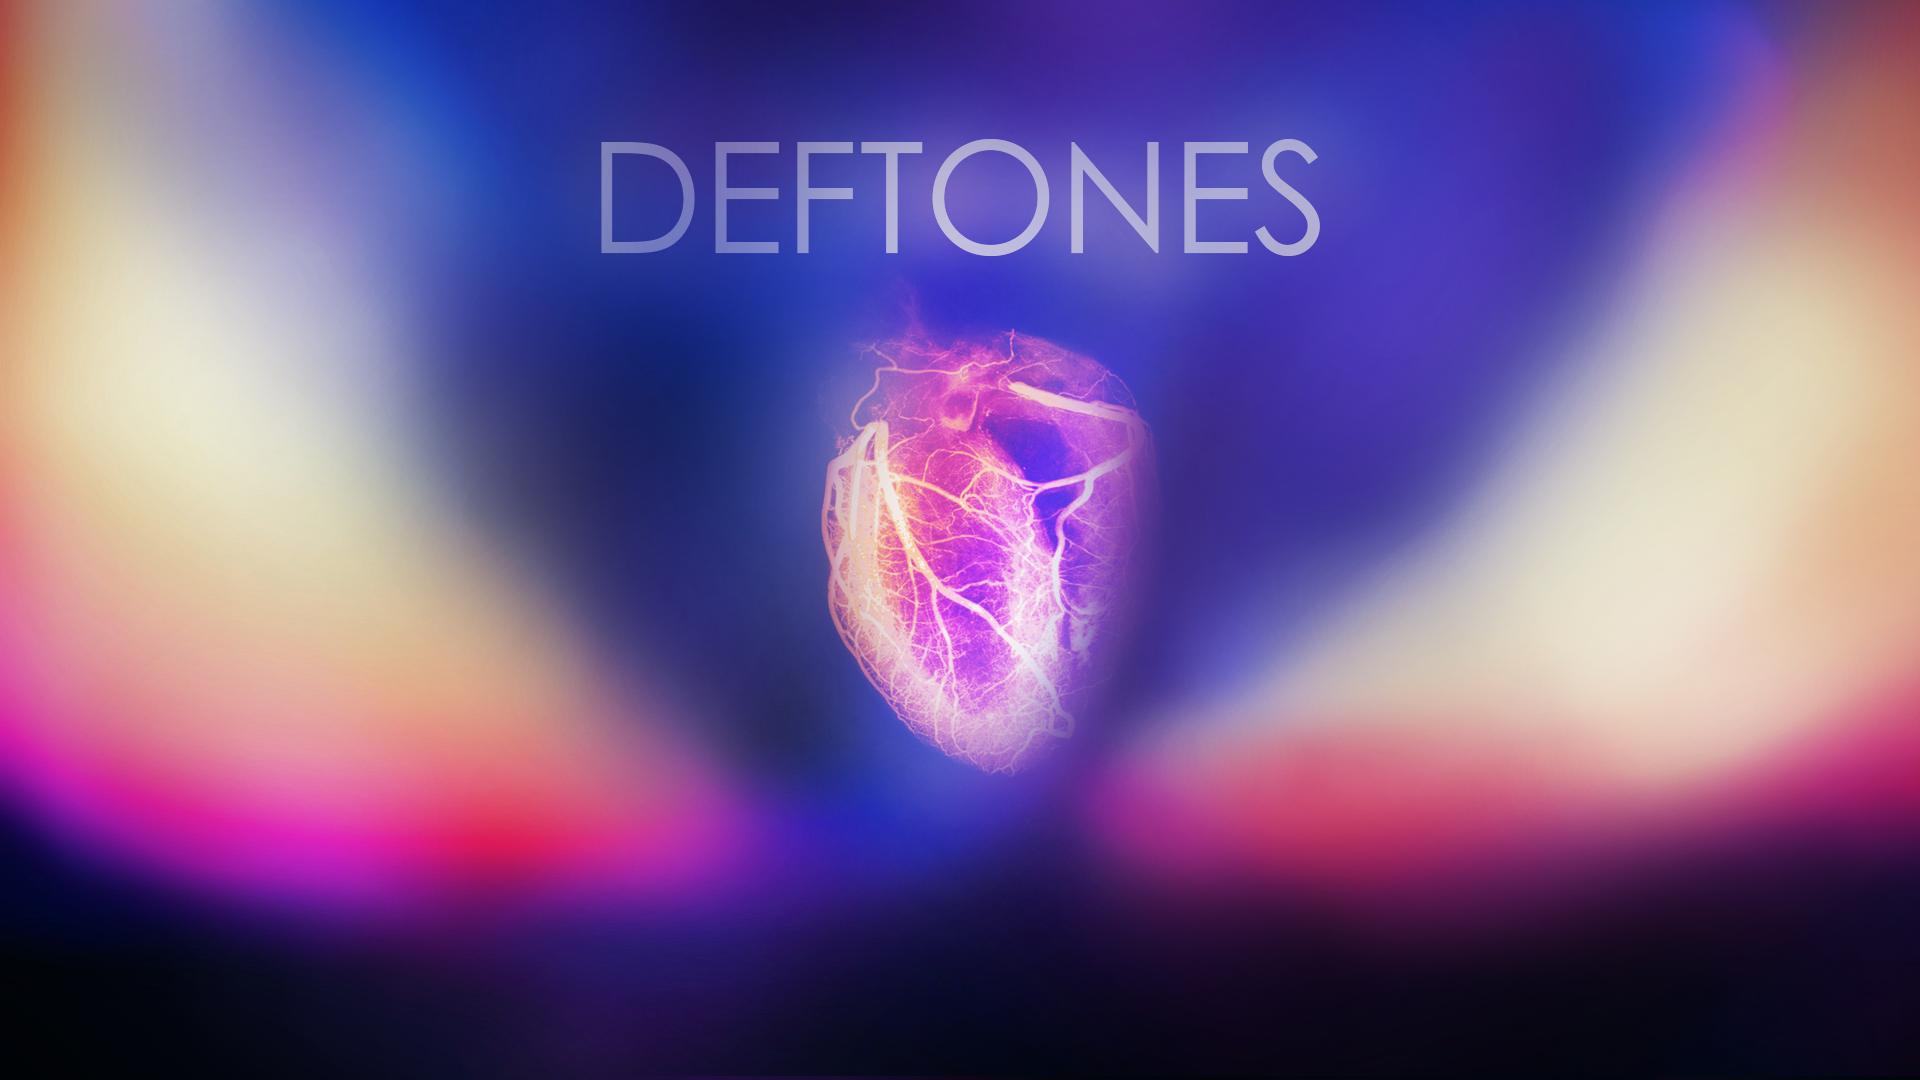 Related Keywords Amp Suggestions For Deftones Wallpaper